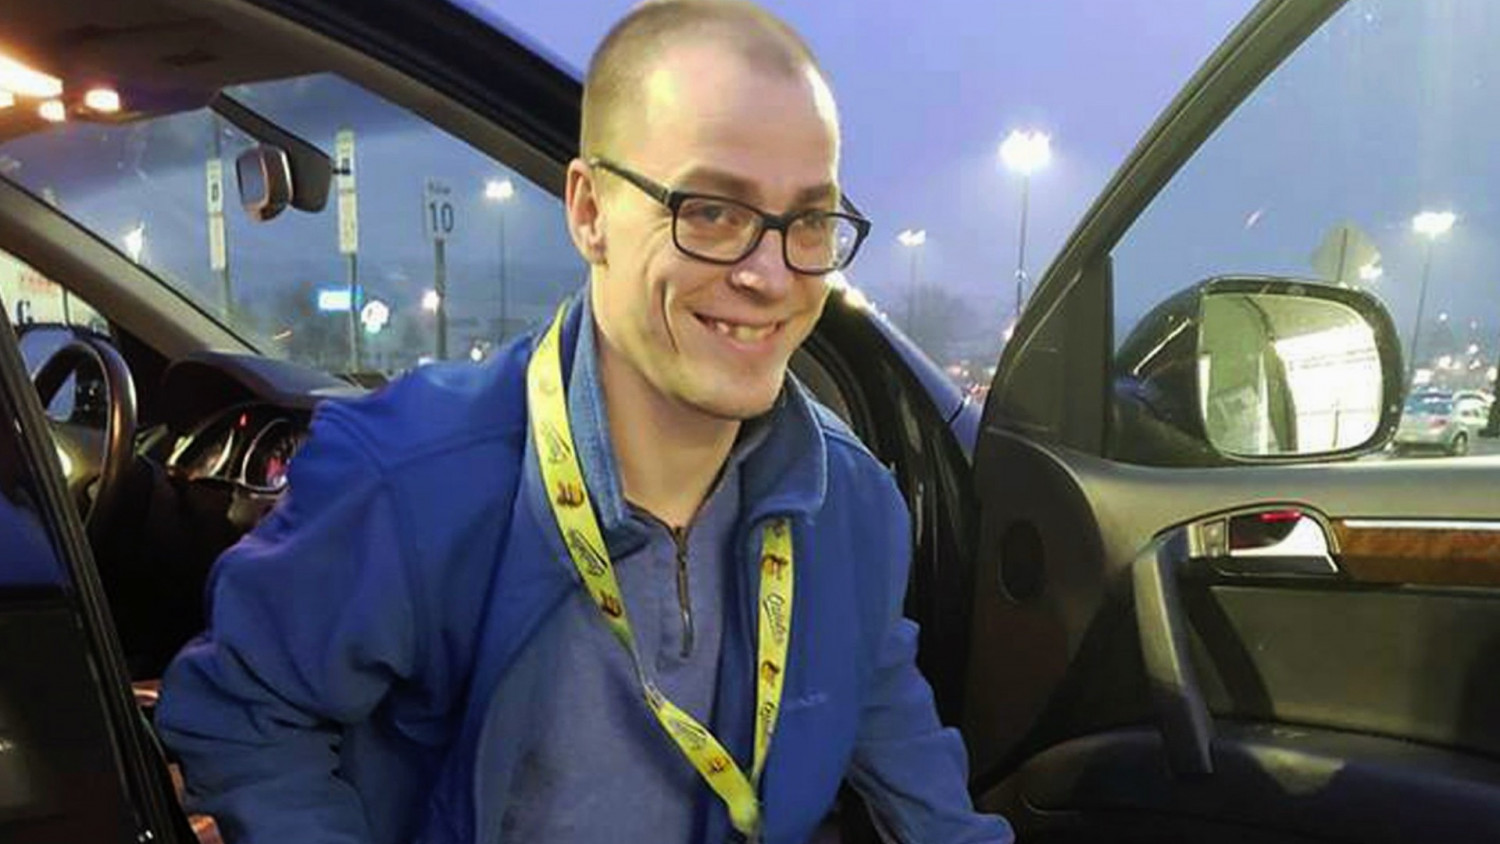 Disabled Greeter Meets With Walmart About Job; No Resolution